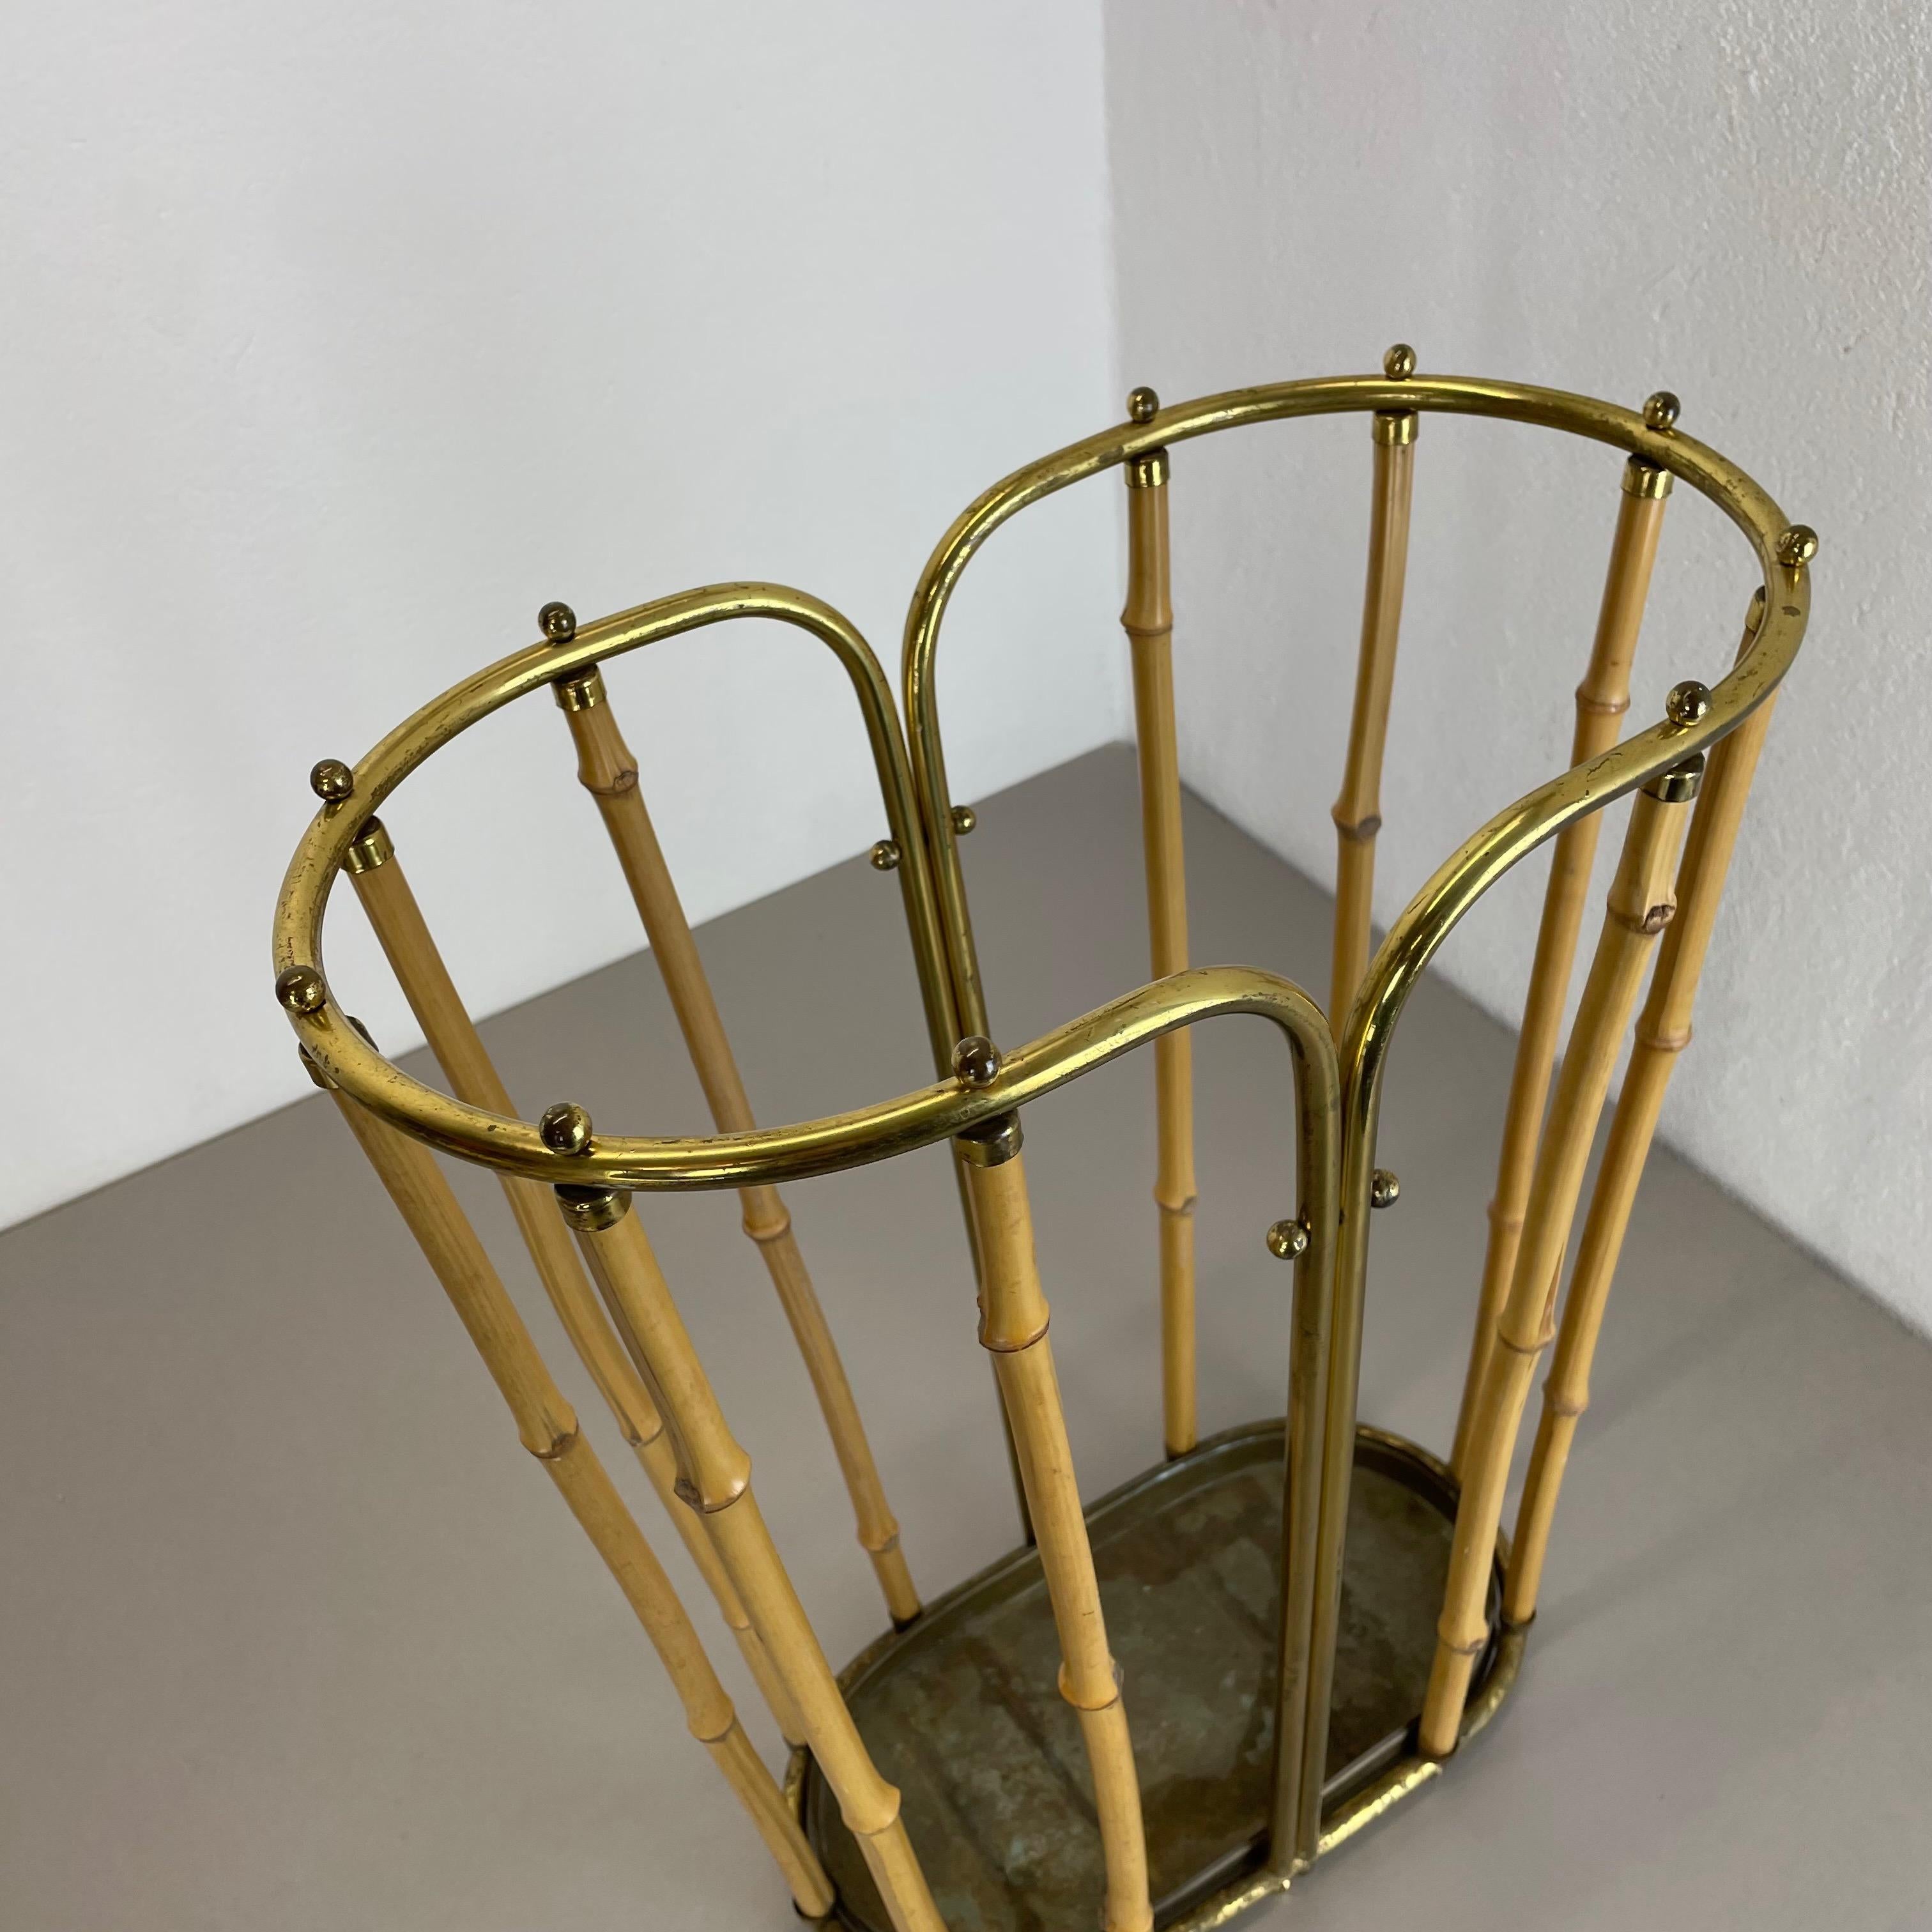 Hollywood Regency Auböck Style Brass Bamboo Umbrella Stand, Austria, 1950s For Sale 5